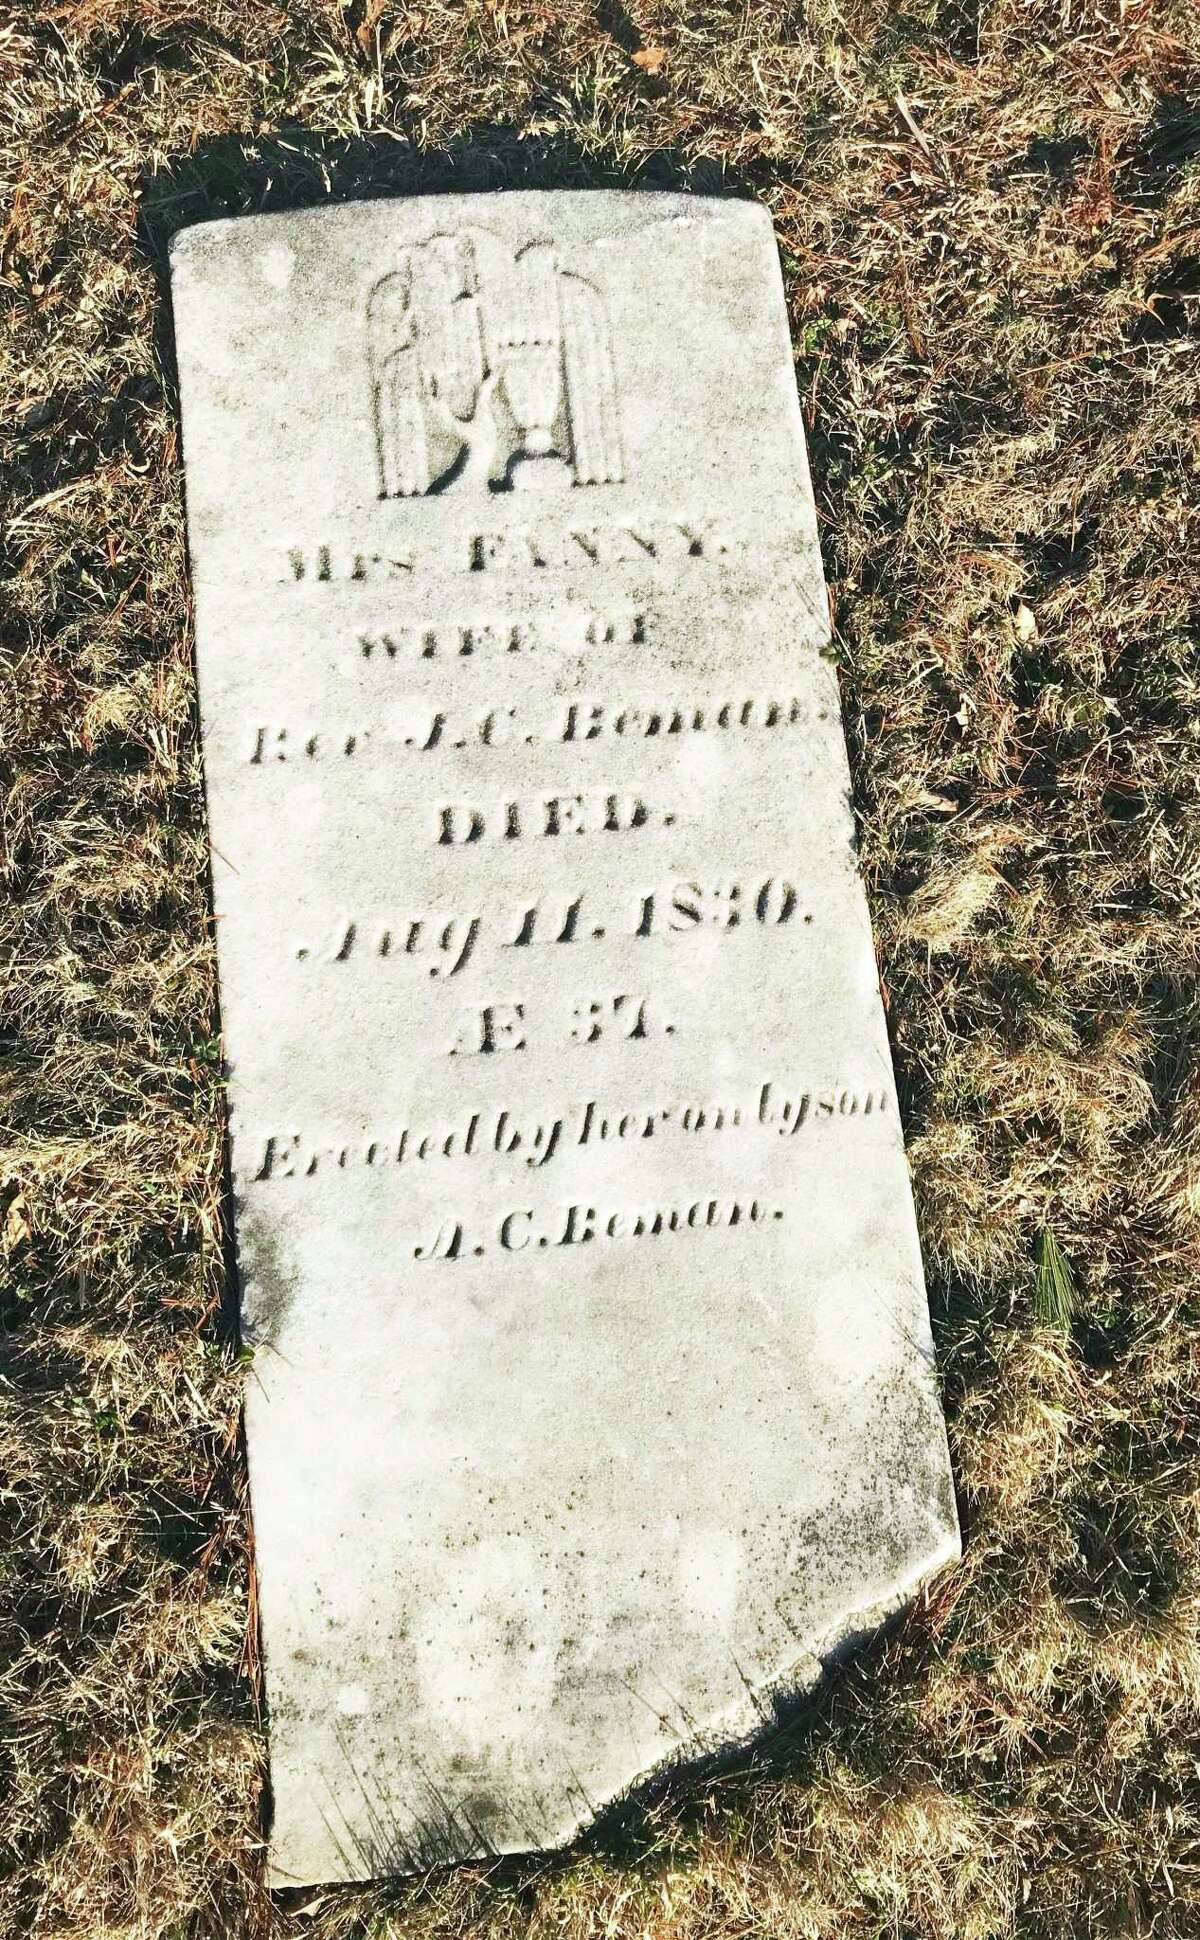 The Rev. Jehiel Beman wife Fanny iw is buried in the Washington Street Cemetery in Middletown.